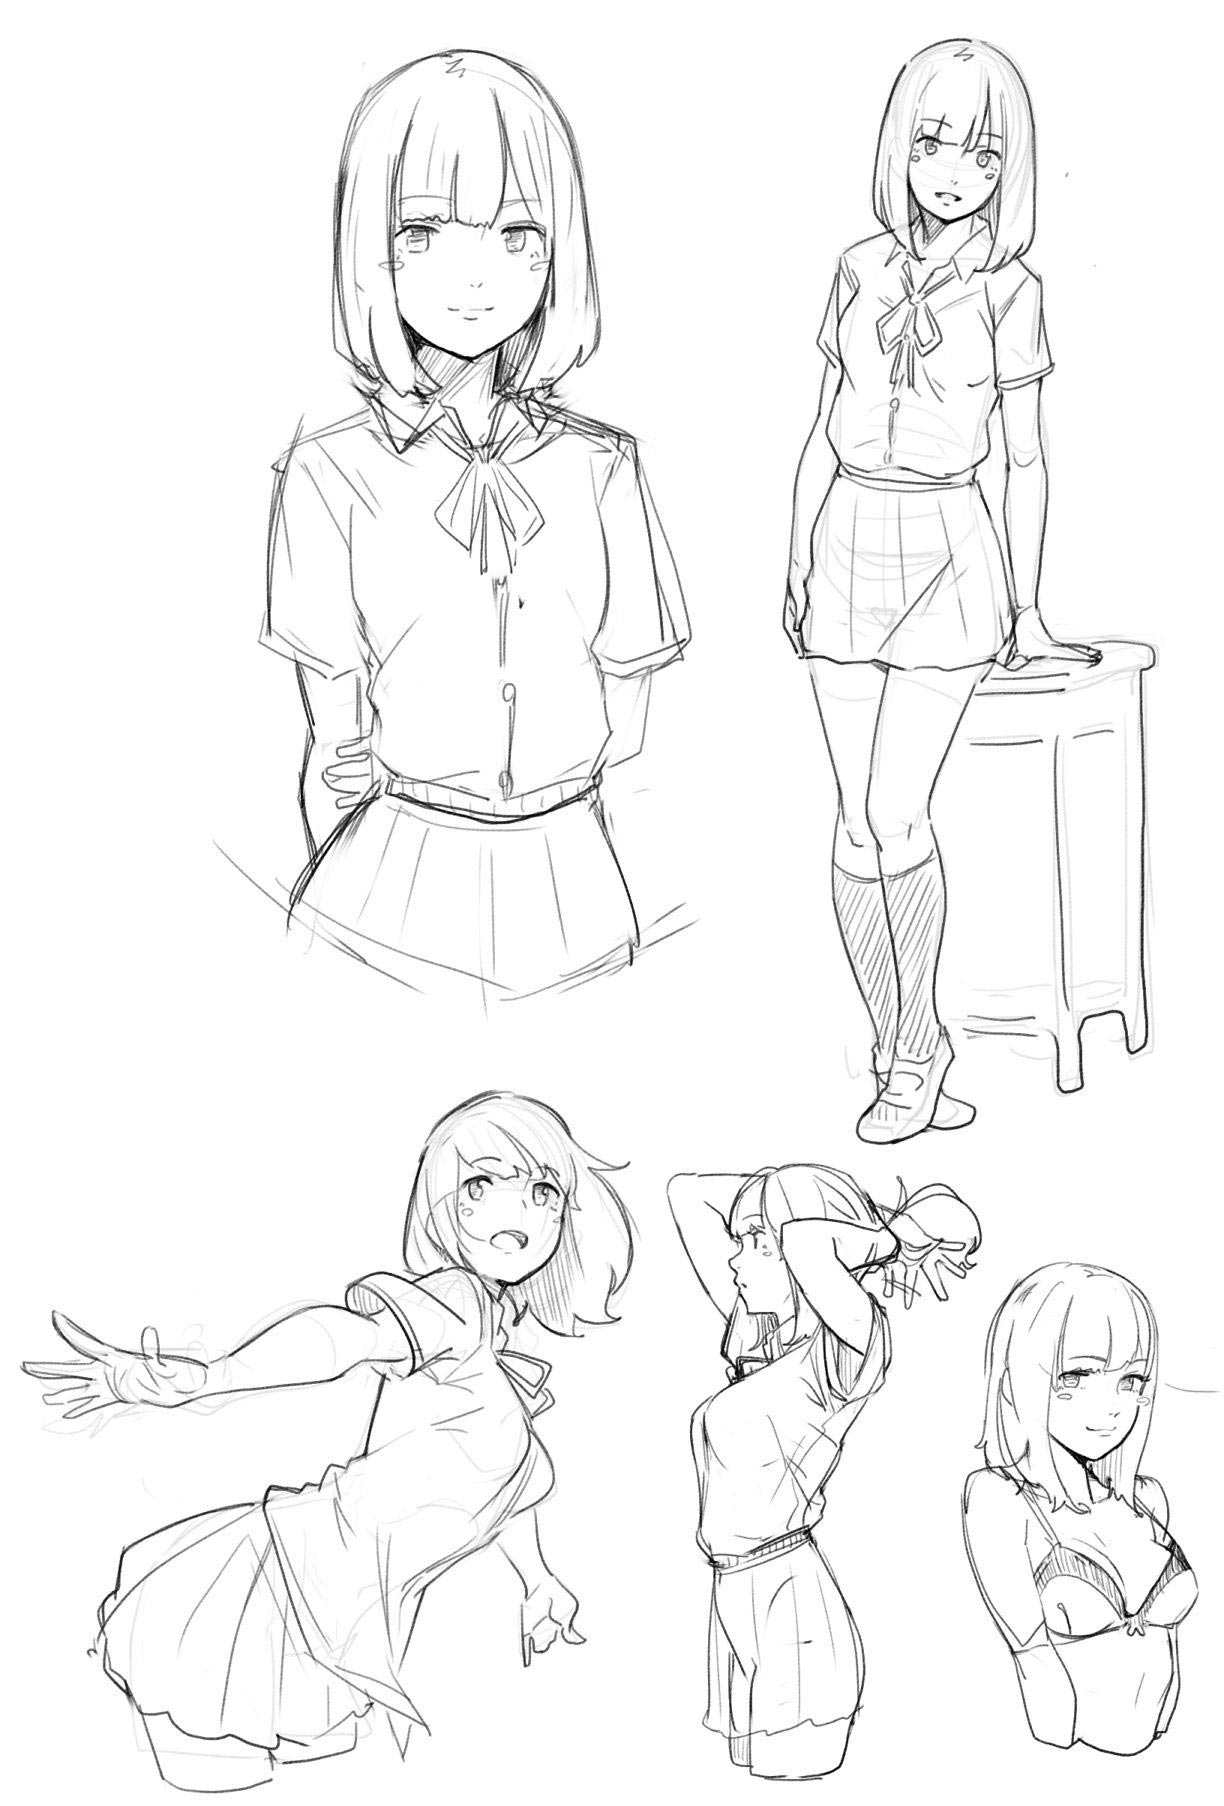 Najwa | Here's some anime sailor shirt references (plus some other clothing  tutorials) ✨ Hope this helps! — Art tools: iPad Pro 2020, Apple P... |  Instagram